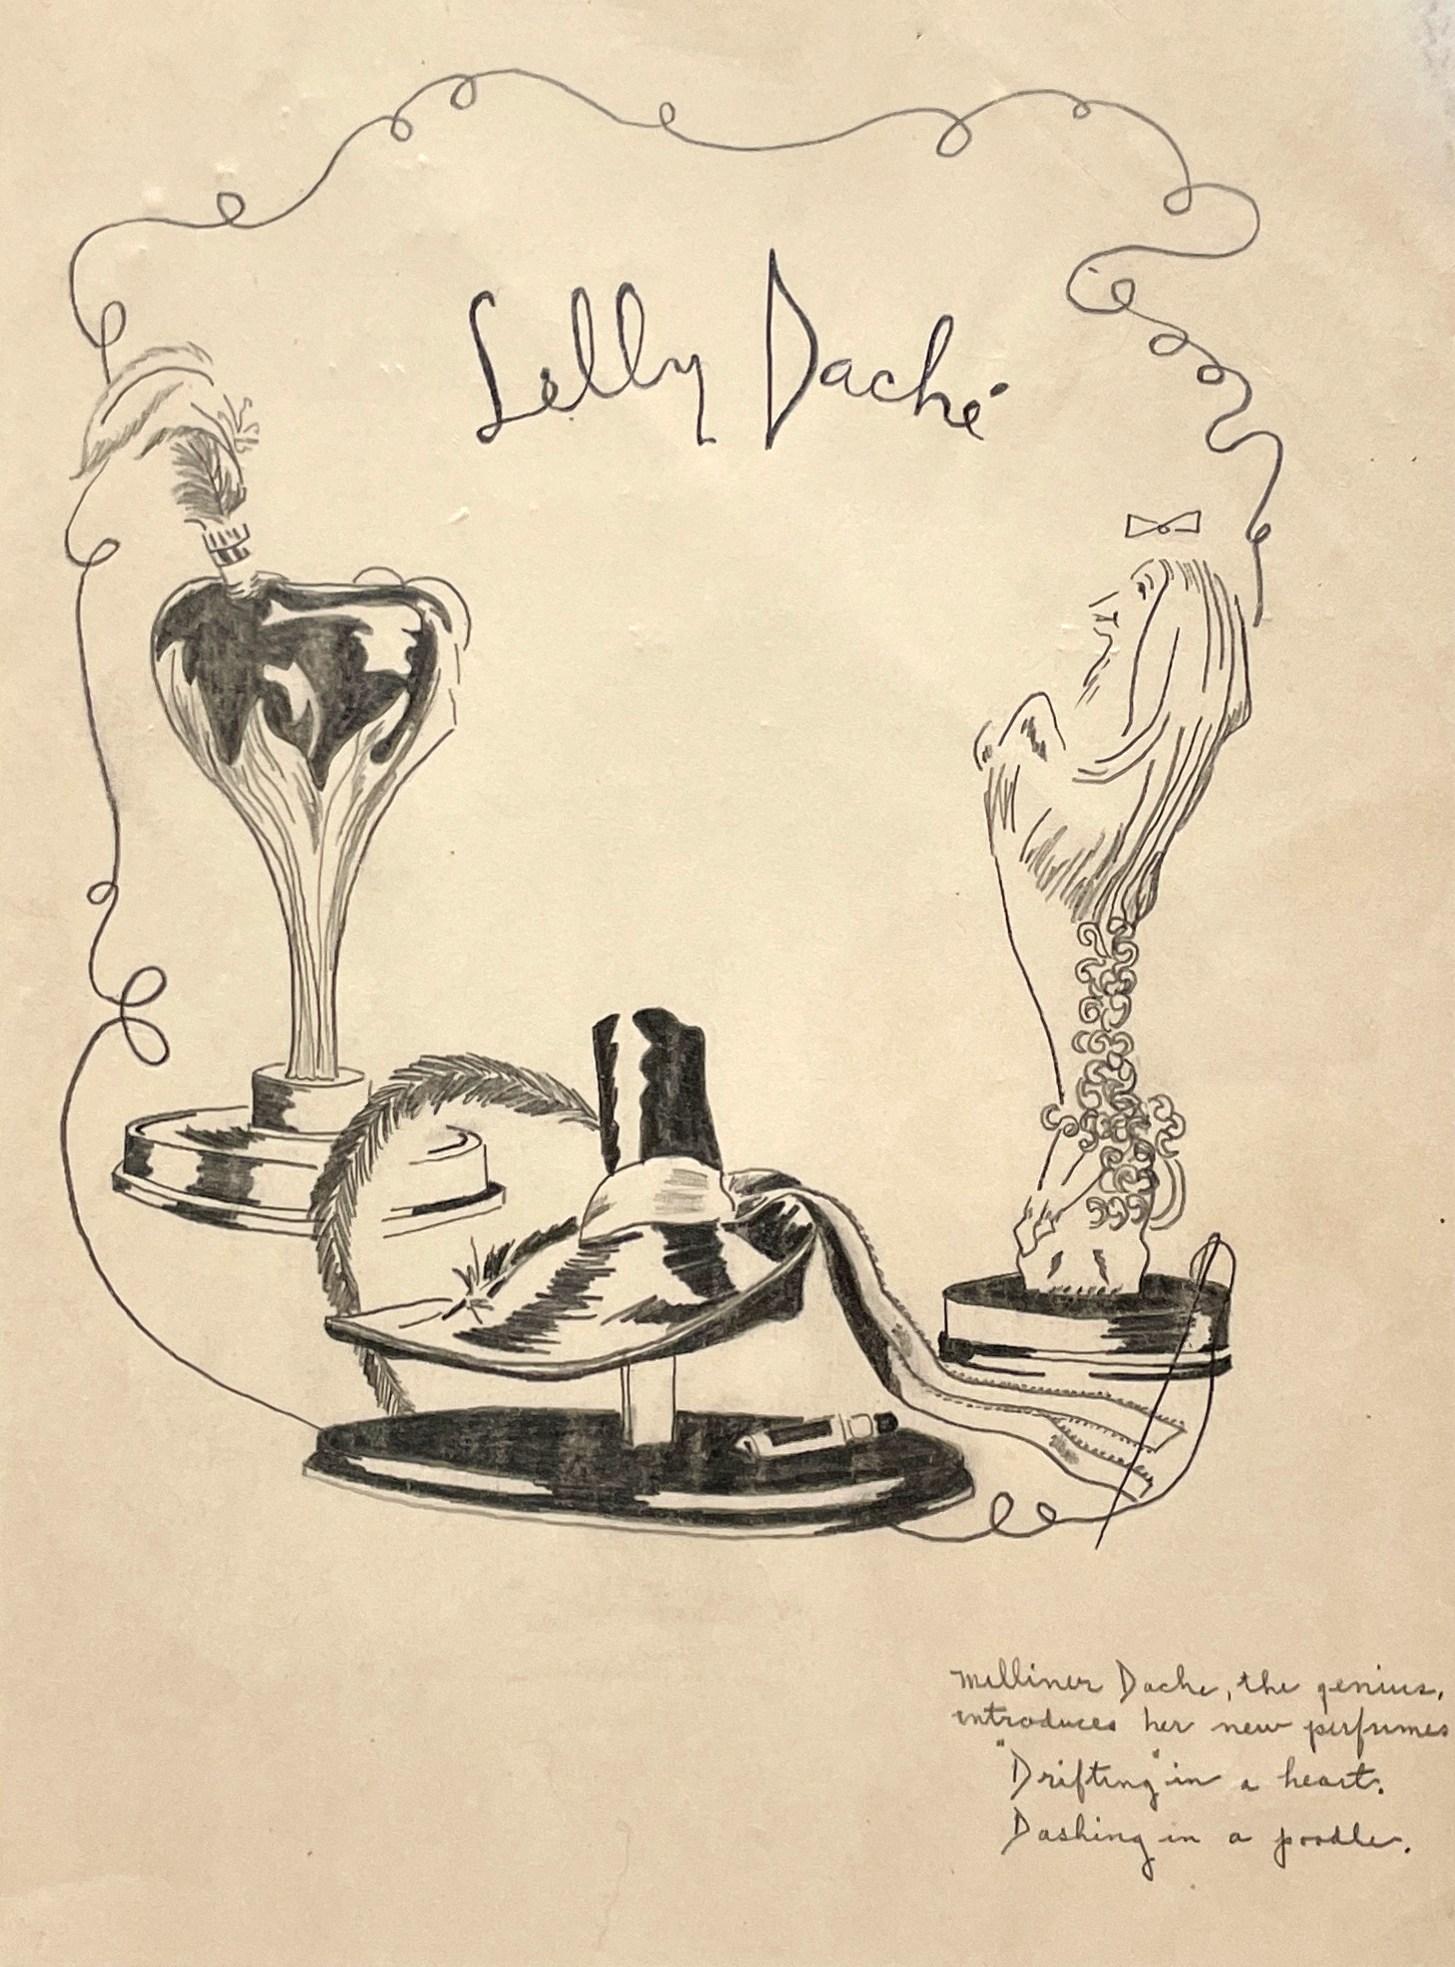 Unknown Still-Life - 1940s Fashion Study Featuring an Advertisement for Lilly Daché Perfumes